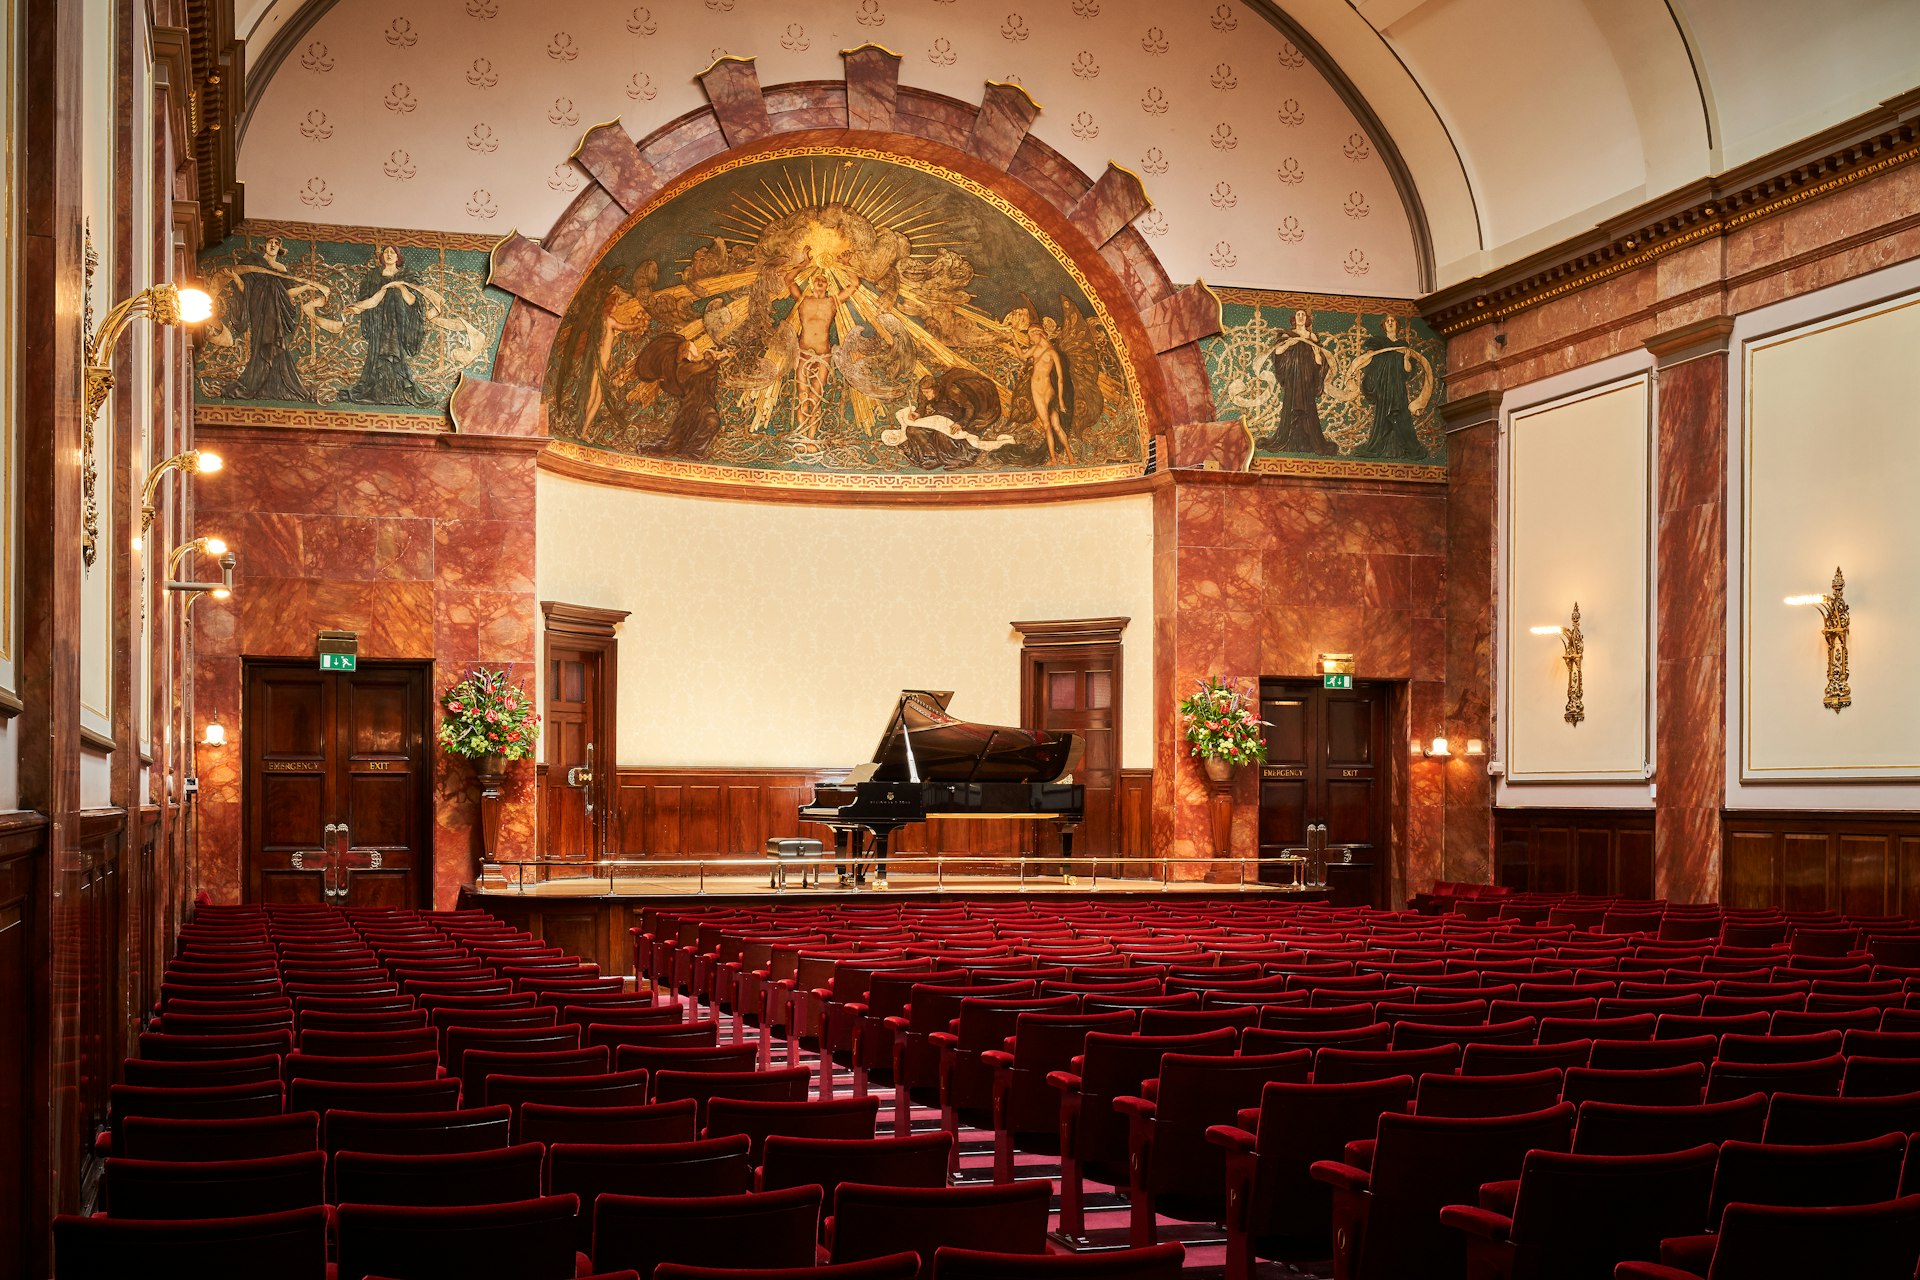 The grand interior of Wigmore Hall in London, with religious iconography behind the stage.